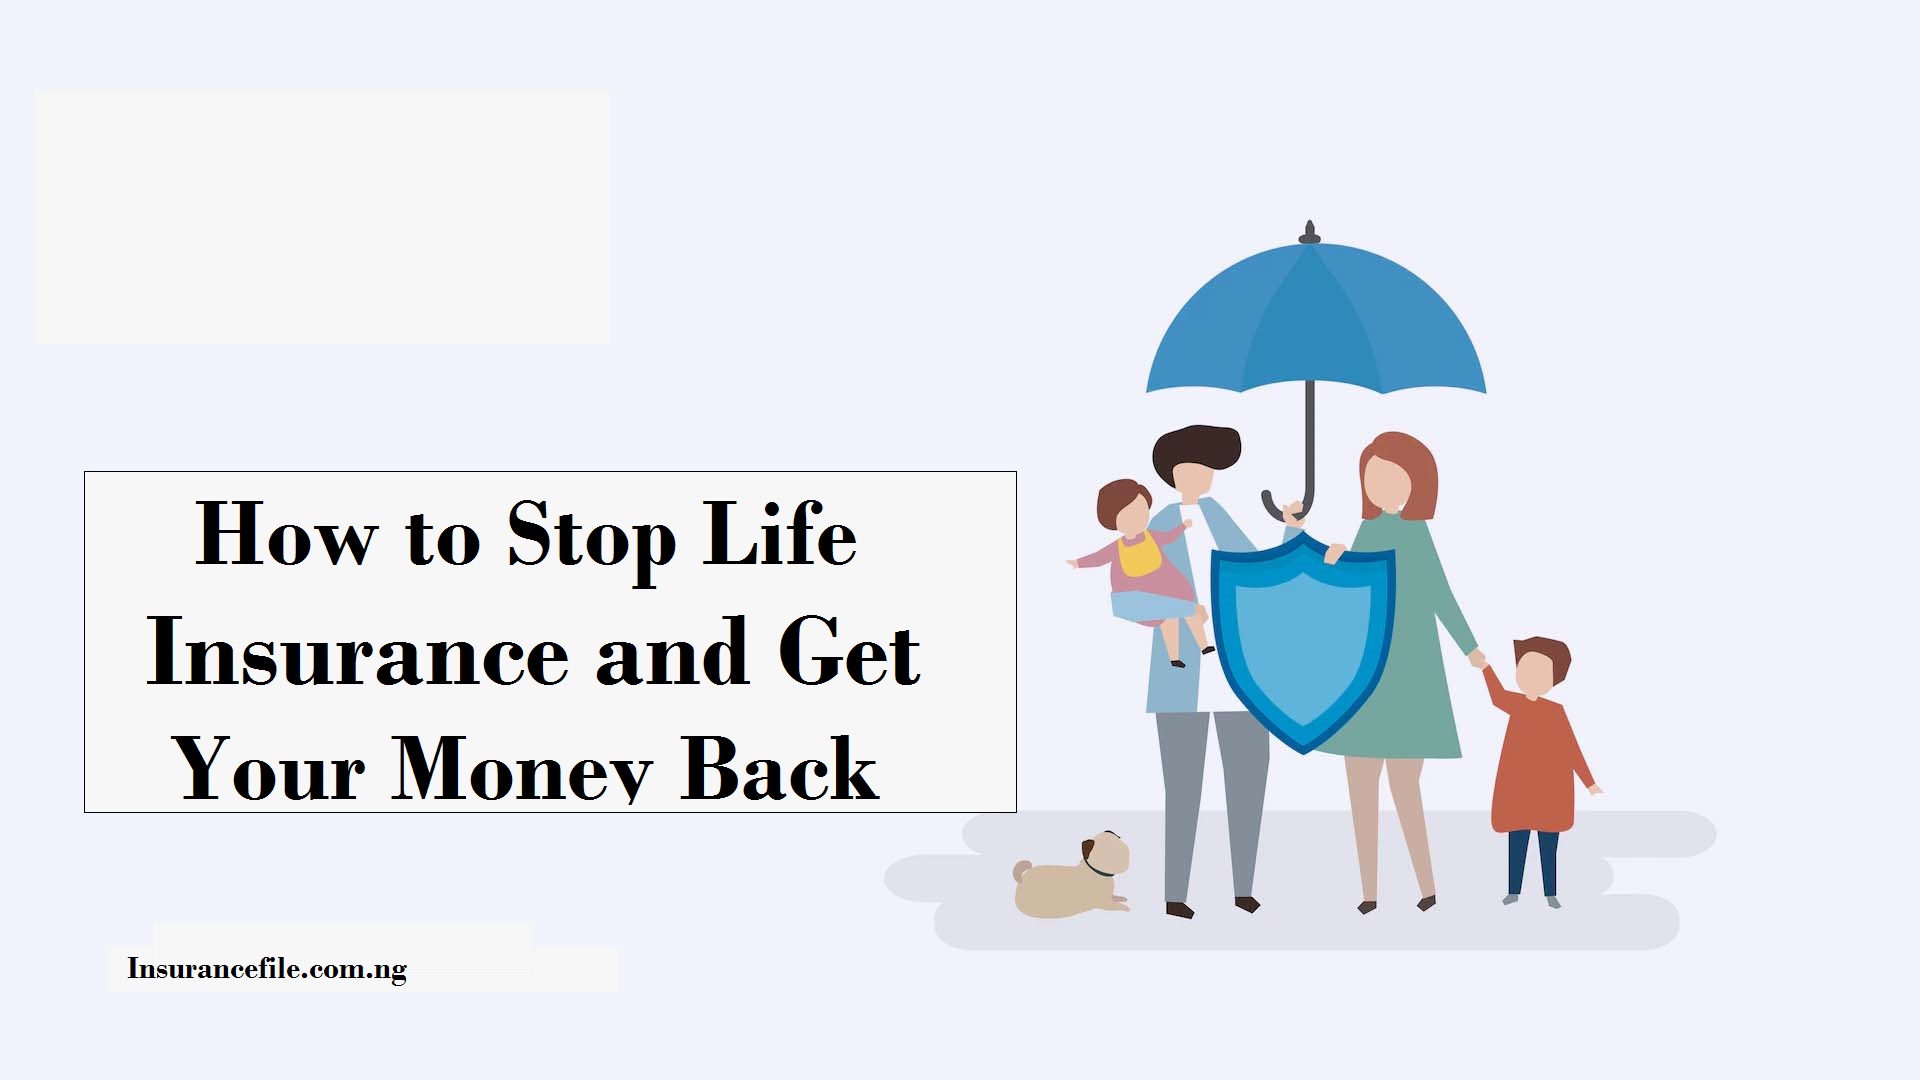 How to Stop Life Insurance and Get Your Money Back